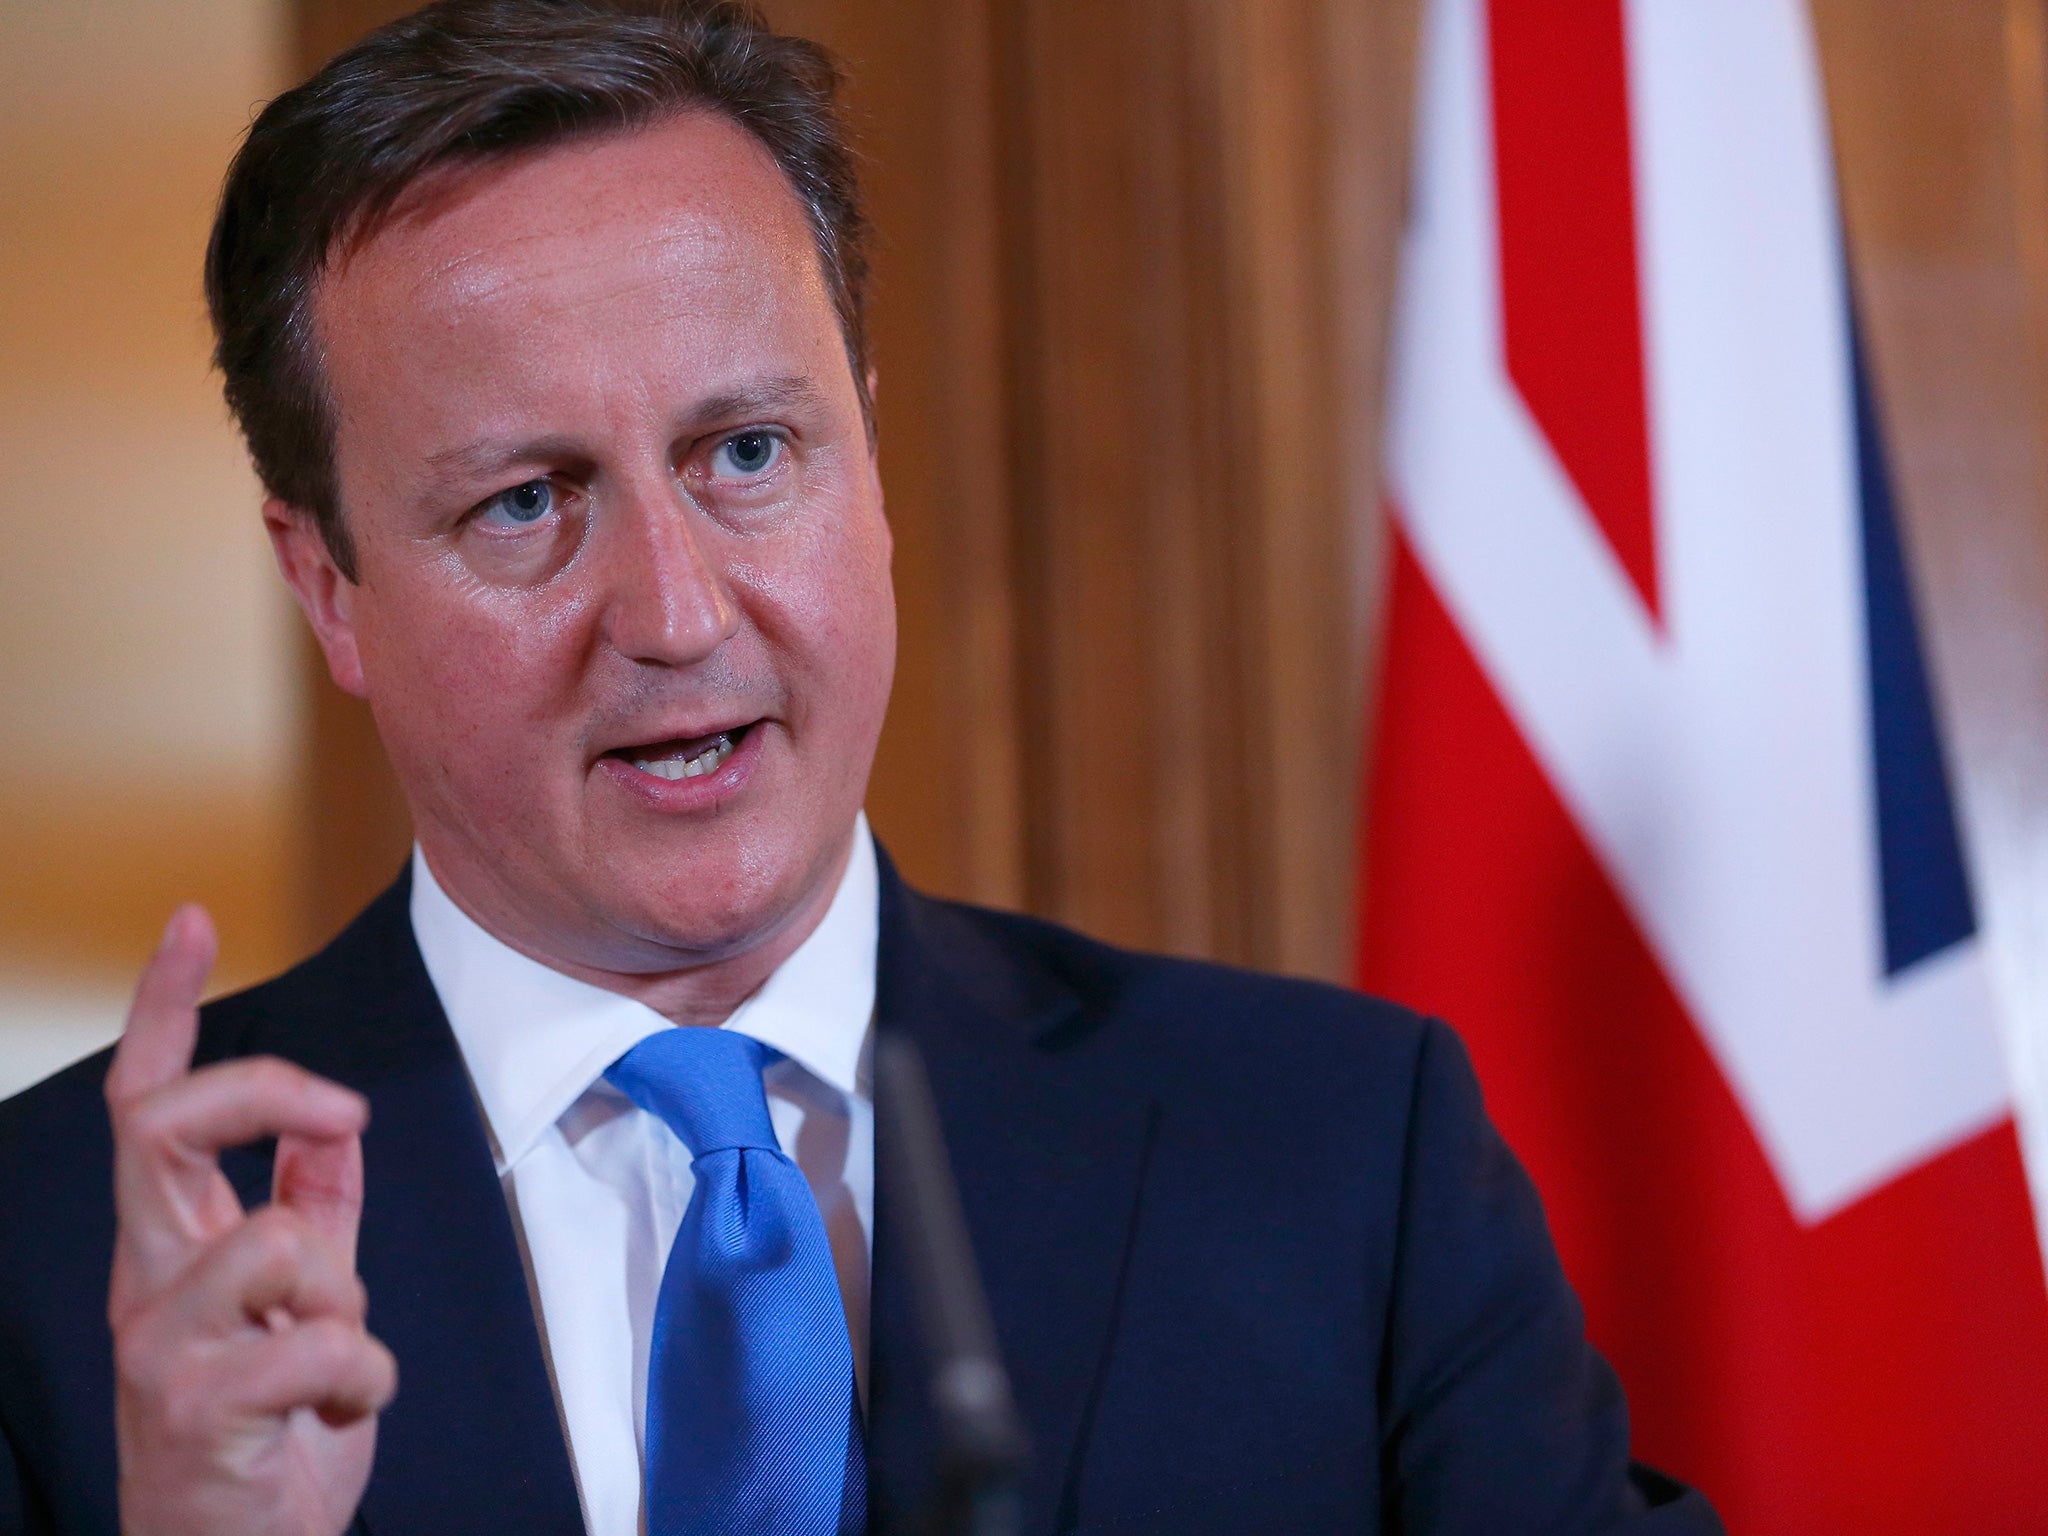 The PM has been criticised by some of Britain’s most prominent human rights lawyers